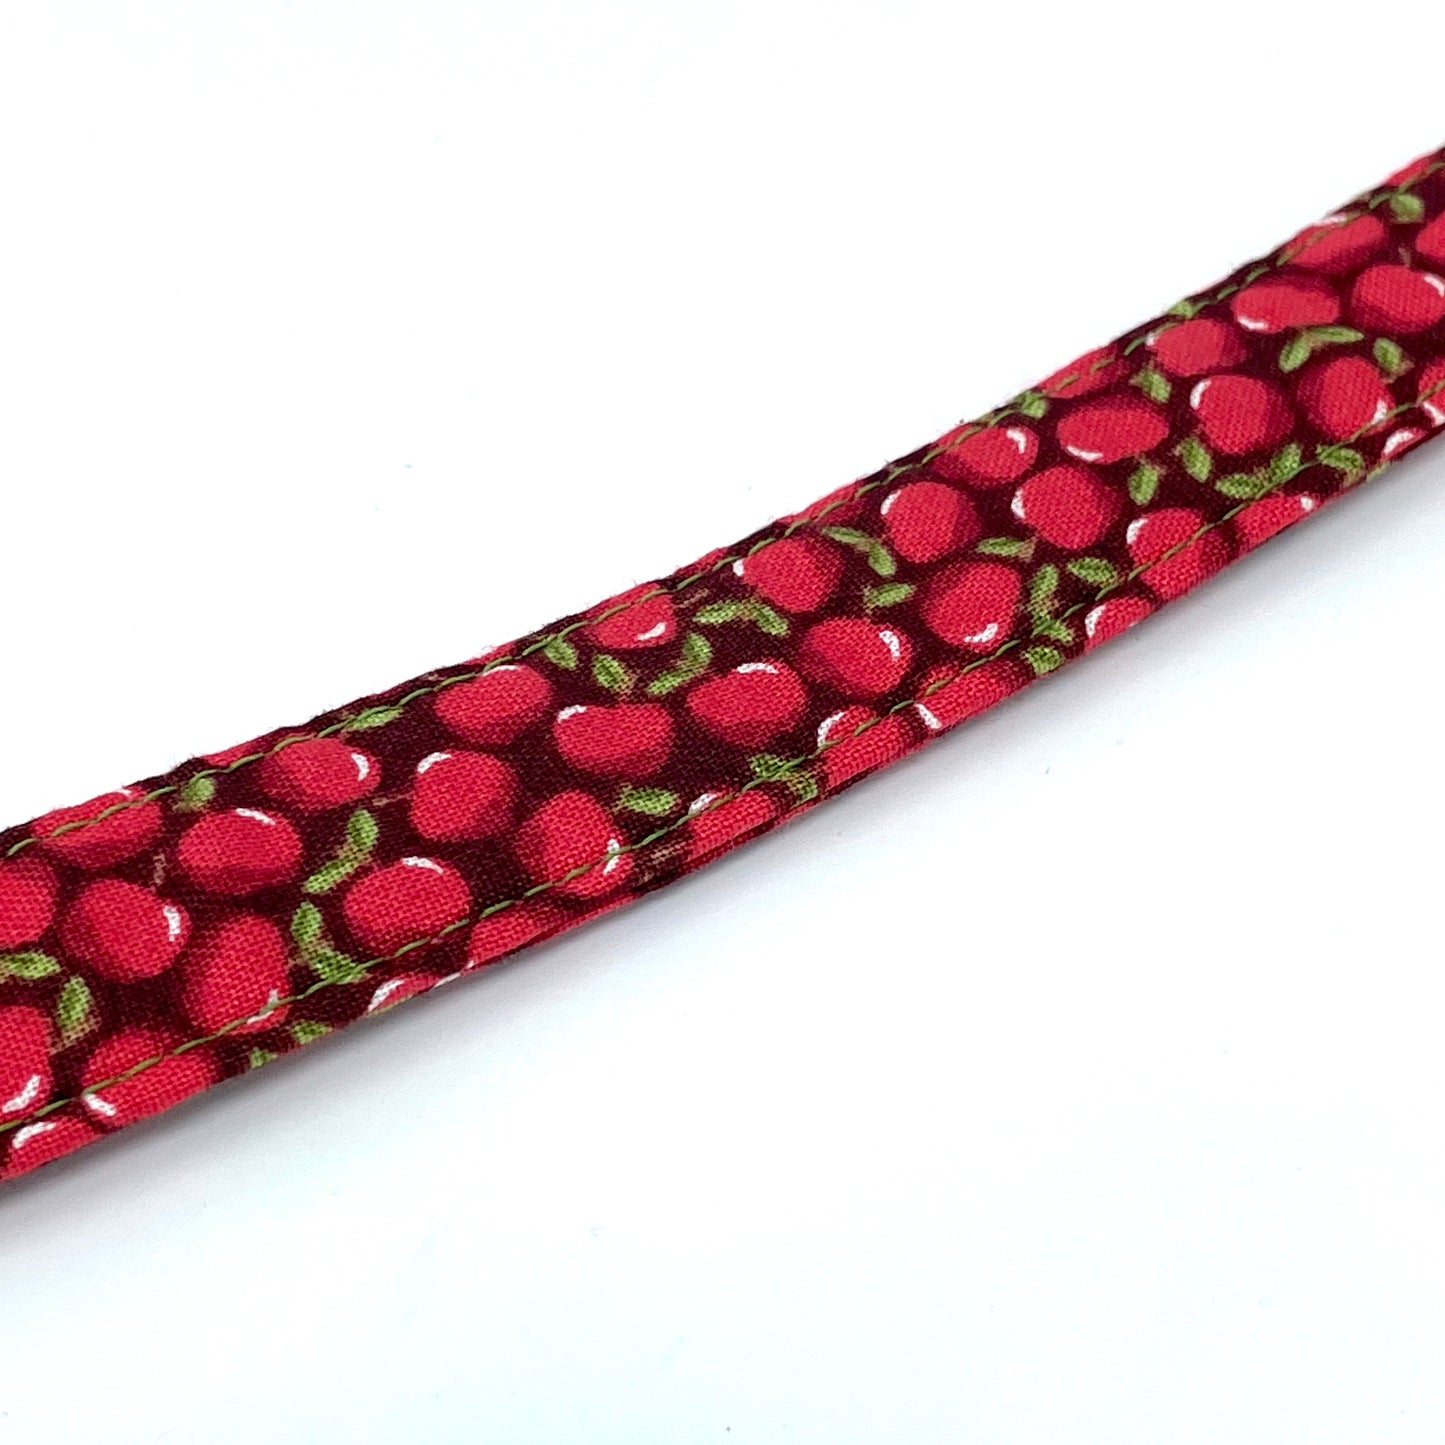 A close up image of a handcrafted fabric dog lead handcrafted by wiff waff designs in nottingham. Red apple print fabric dog lead on a dark background with green stitching.